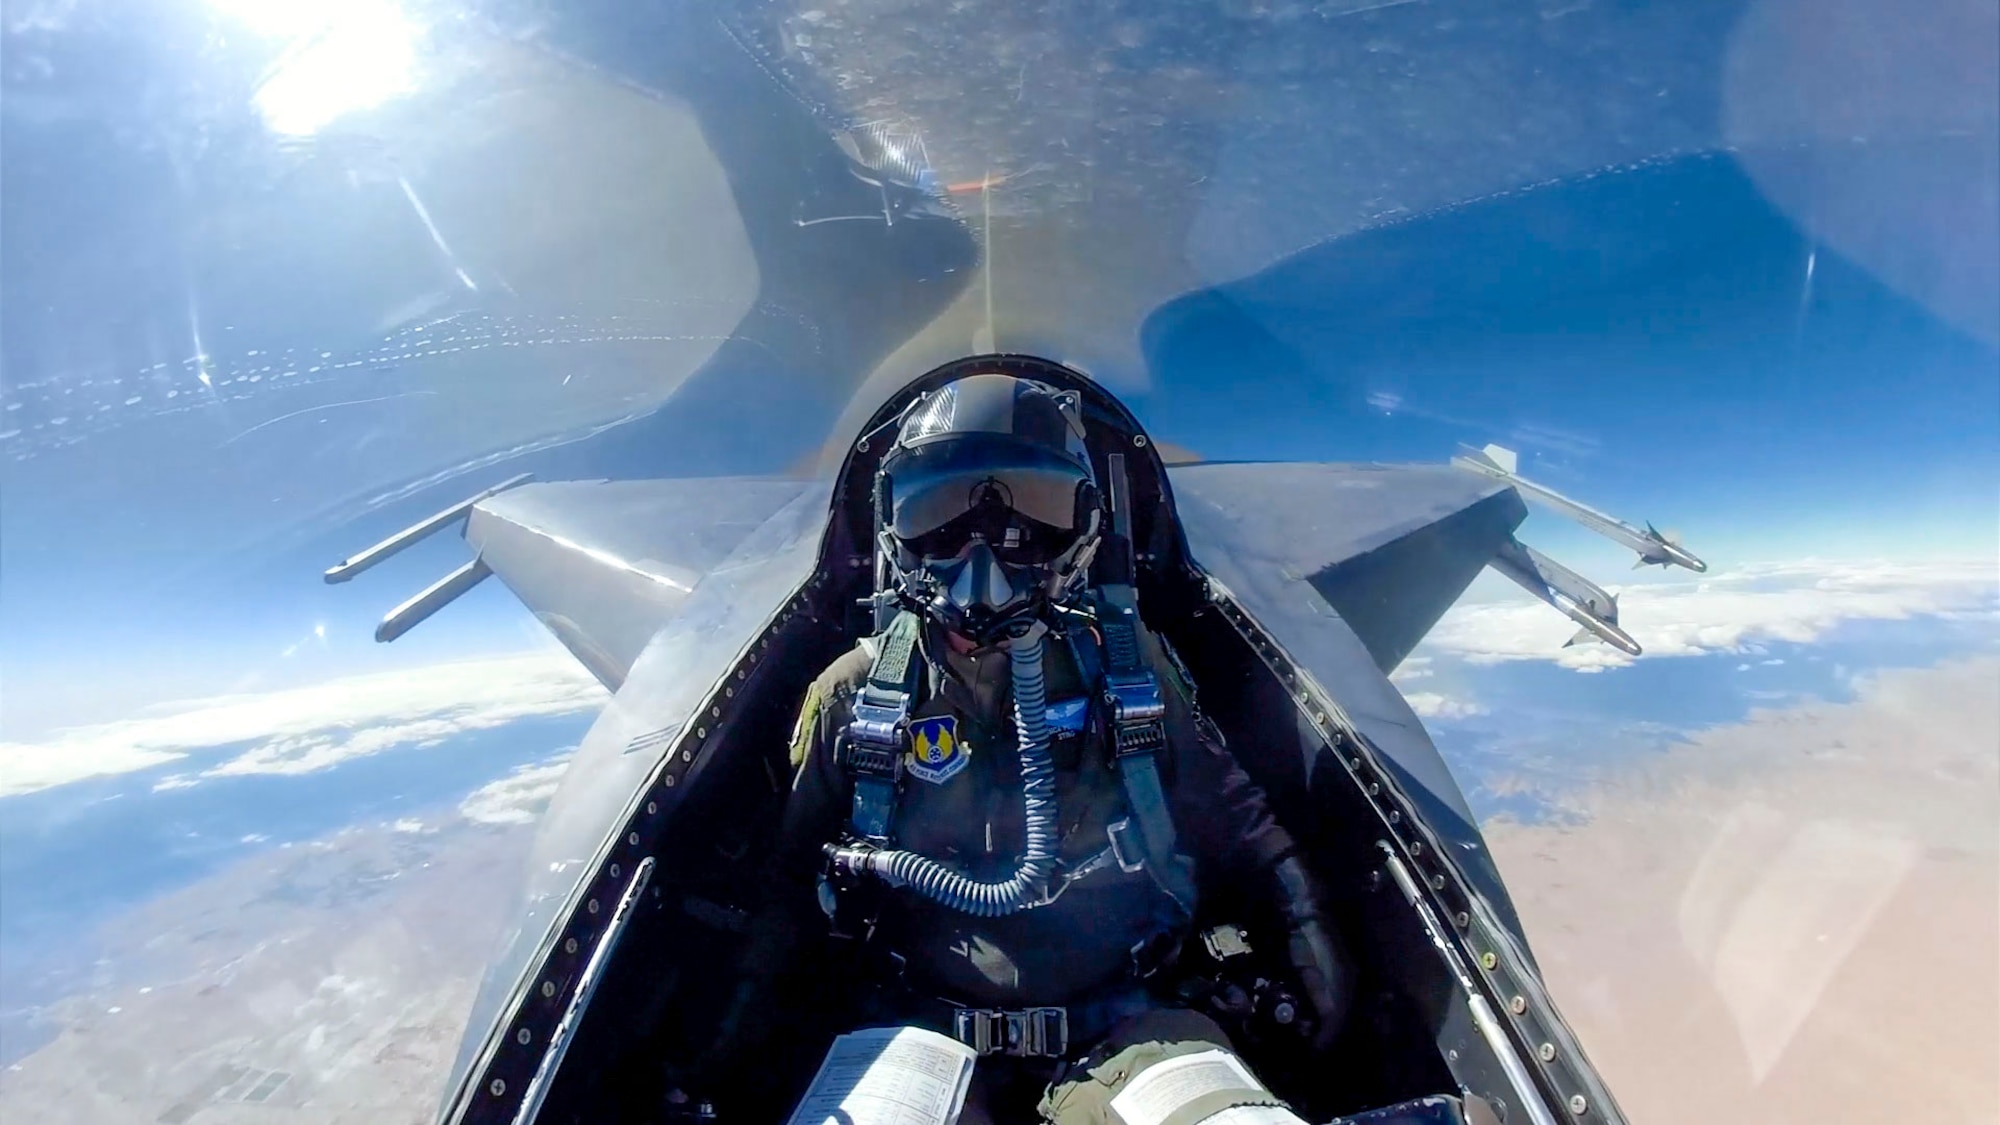 As we celebrate National Engineers Week, get an exclusive look at what it's like to be a United States Air Force Flight Test Engineer going behind the scenes within the USAF Test Pilot School.